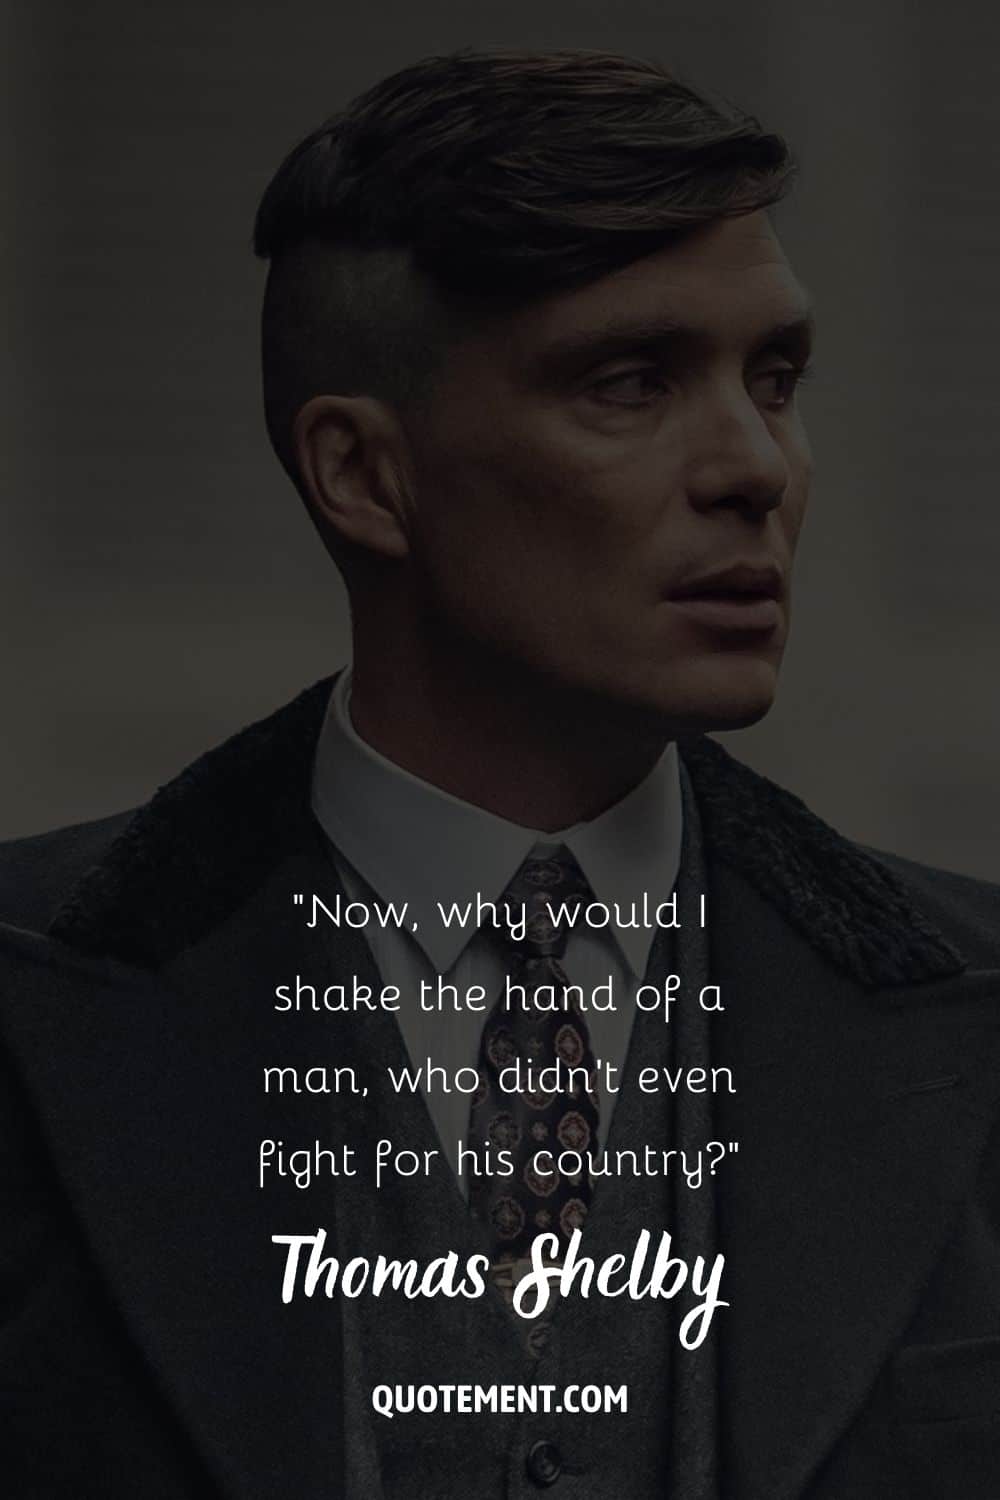 Cillian Murphy as a dashing Peaky Blinder representing Thomas Shelby quote
